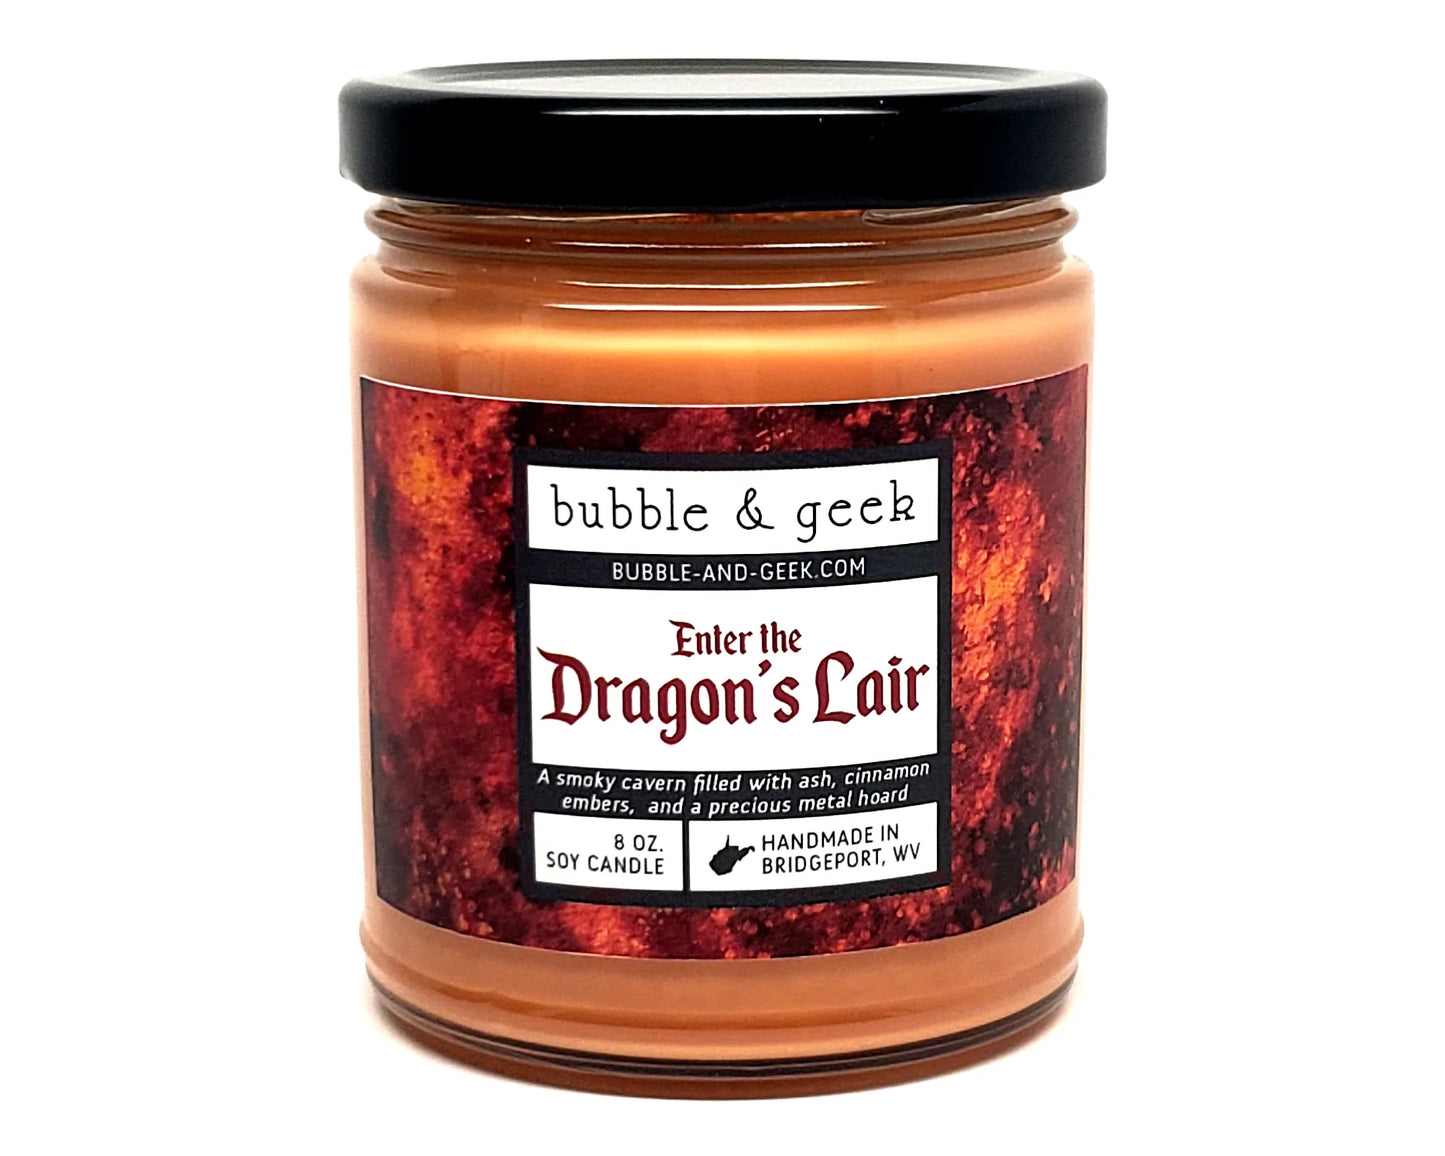 Enter the Dragon's Lair (RPG Collection) Candle Jar